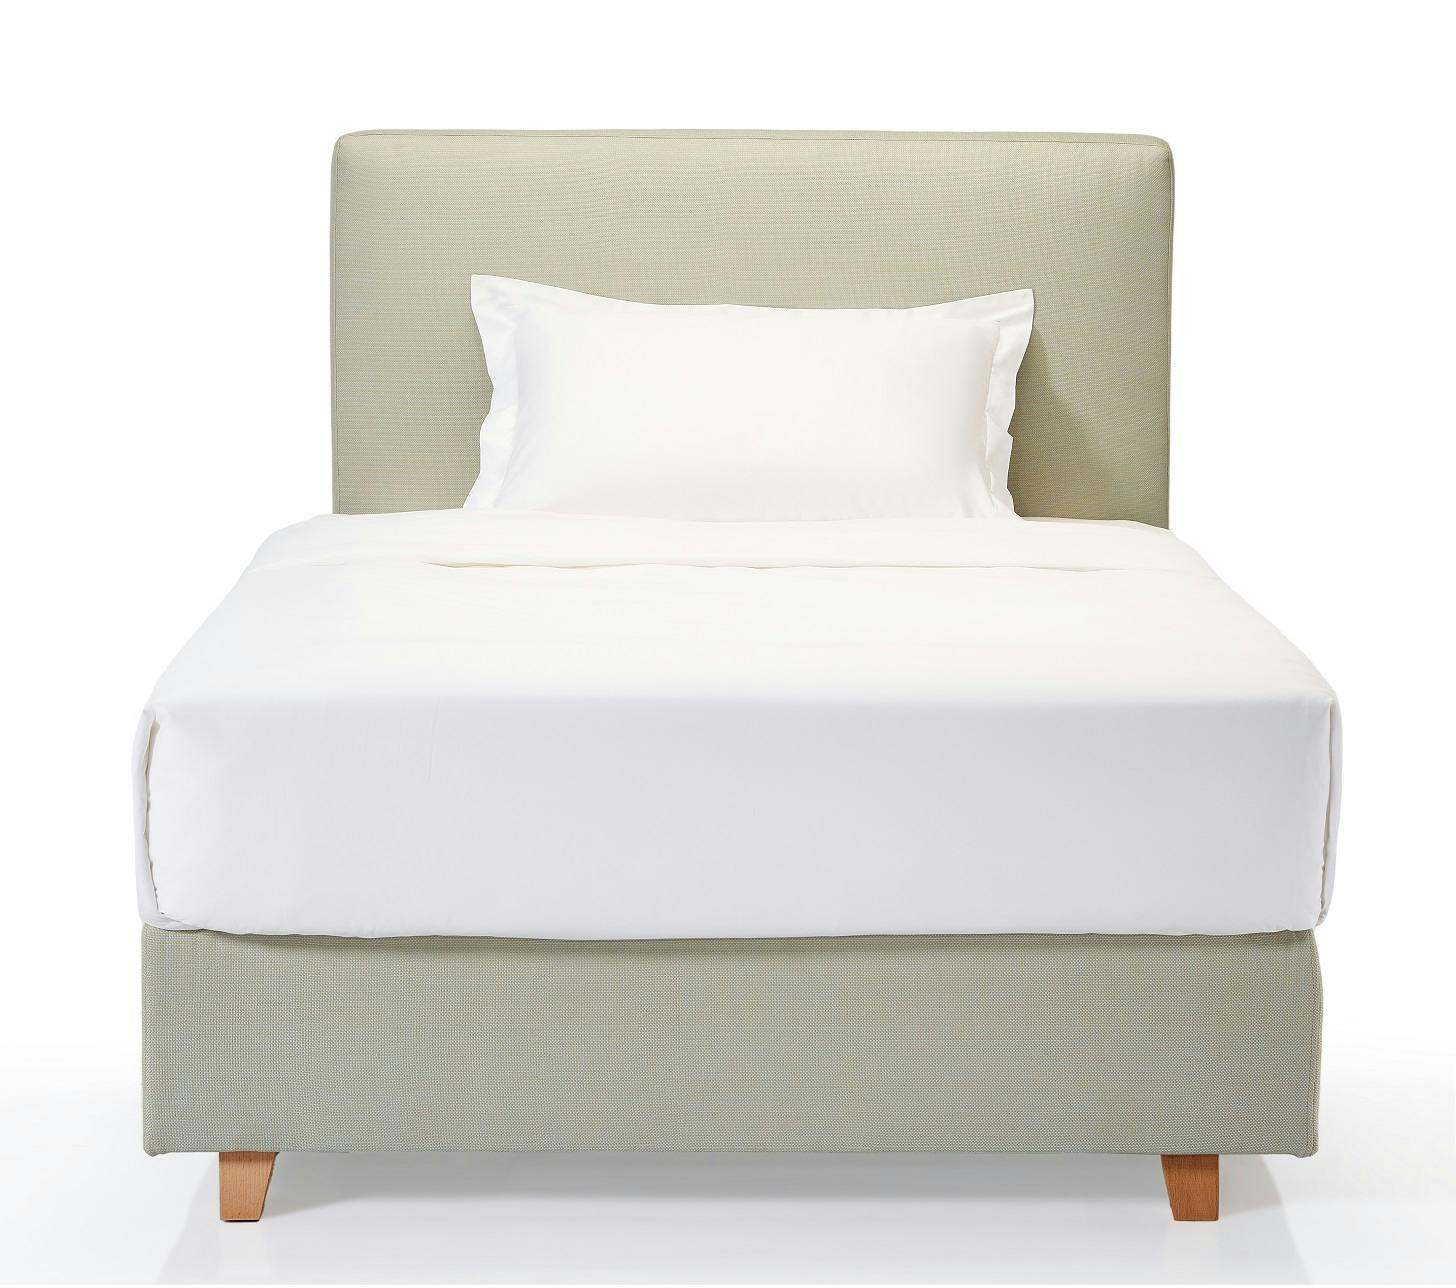 Simple Upholstered Bed with legs 120cm 1